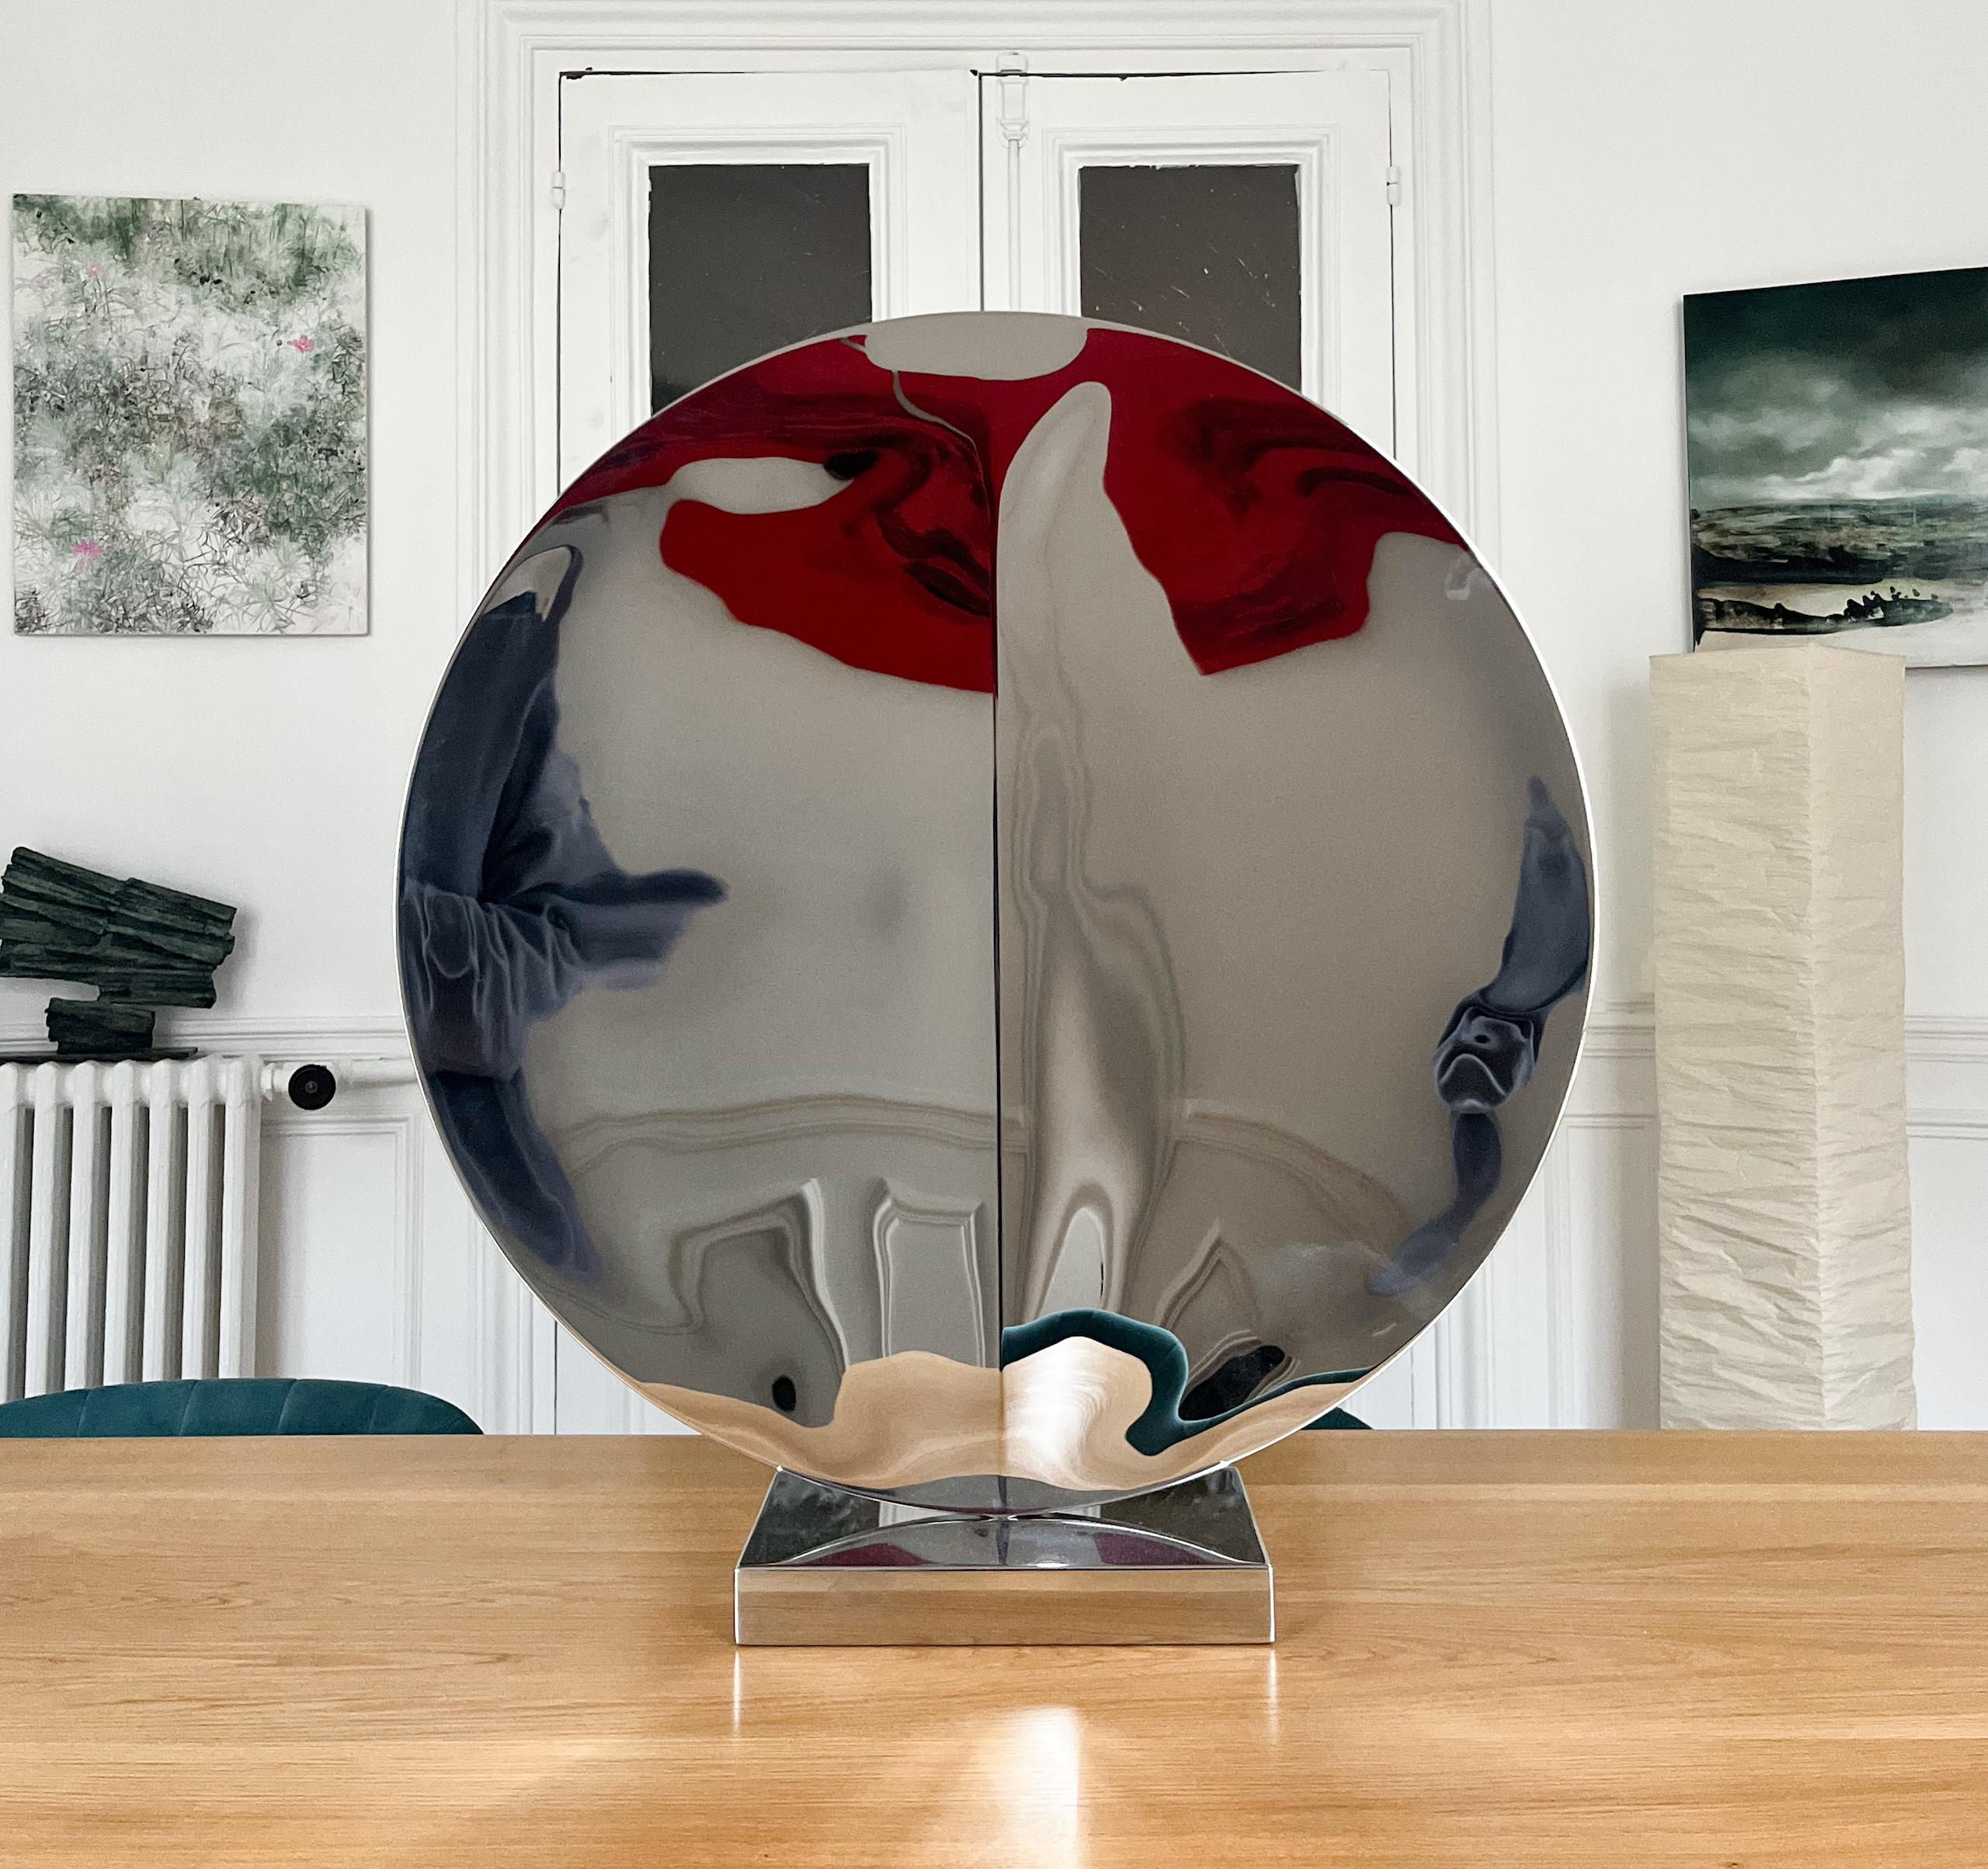 Mirror “with fold” I by Franck K - Stainless steel sculpture, reflection, light For Sale 5